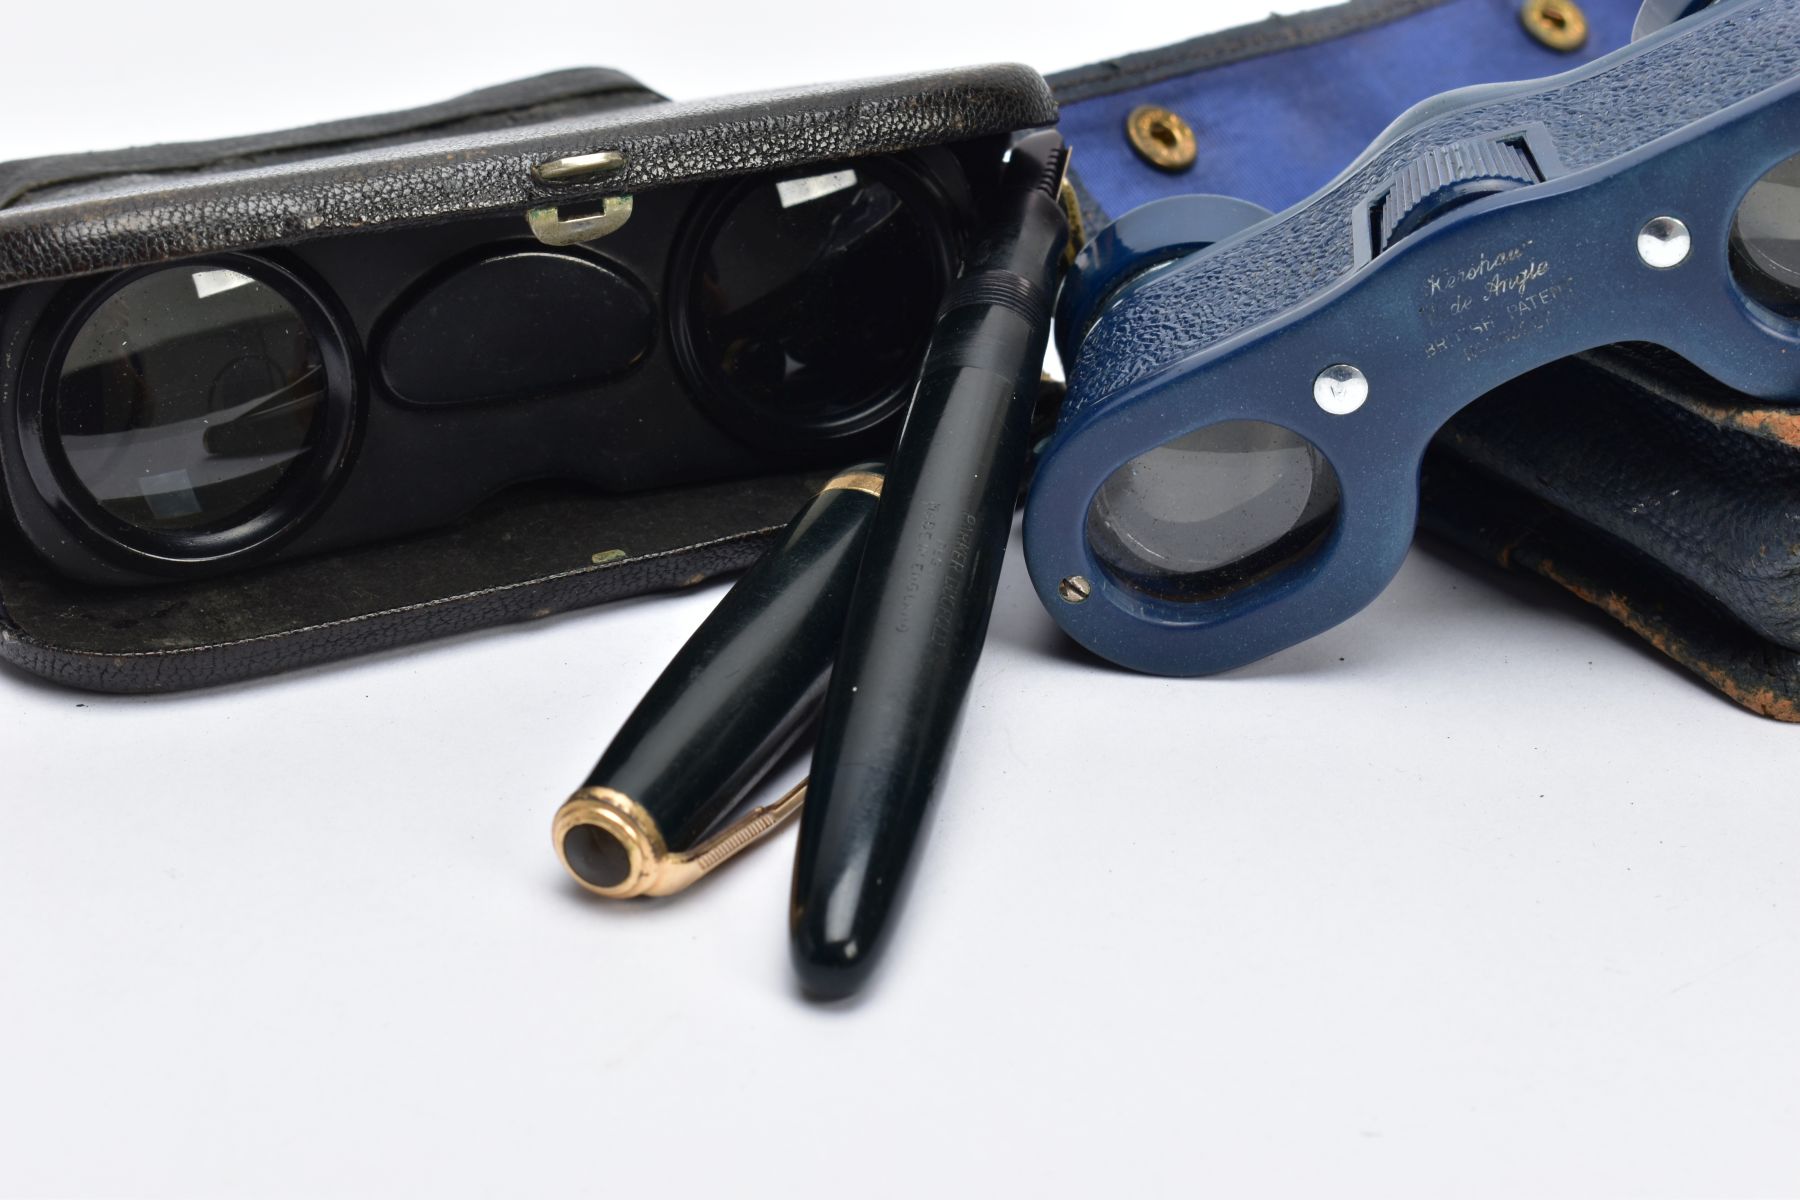 TWO PAIRS OF OPERA GLASSES AND A PARKER FOUNTAIN PEN, a cased pair of blue Kershaw opera glasses, - Image 3 of 4